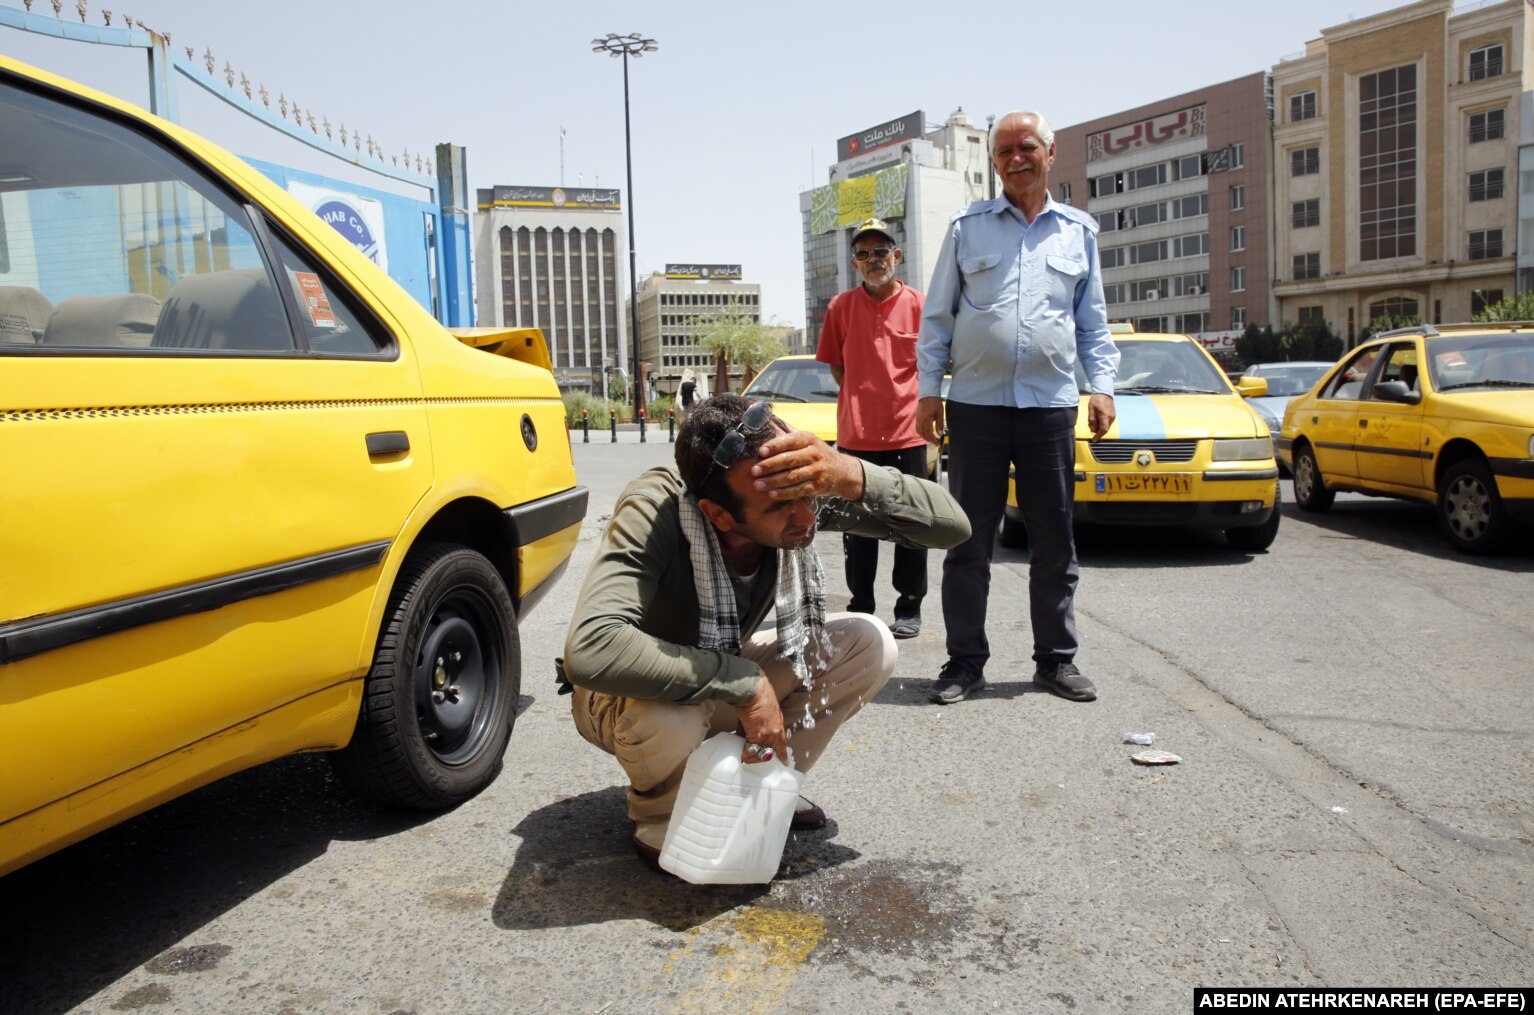 An Tehran taxi driver splashes water on his face in attempt to stay cool during a hot and sunny day in the Iranian capital earlier this month.